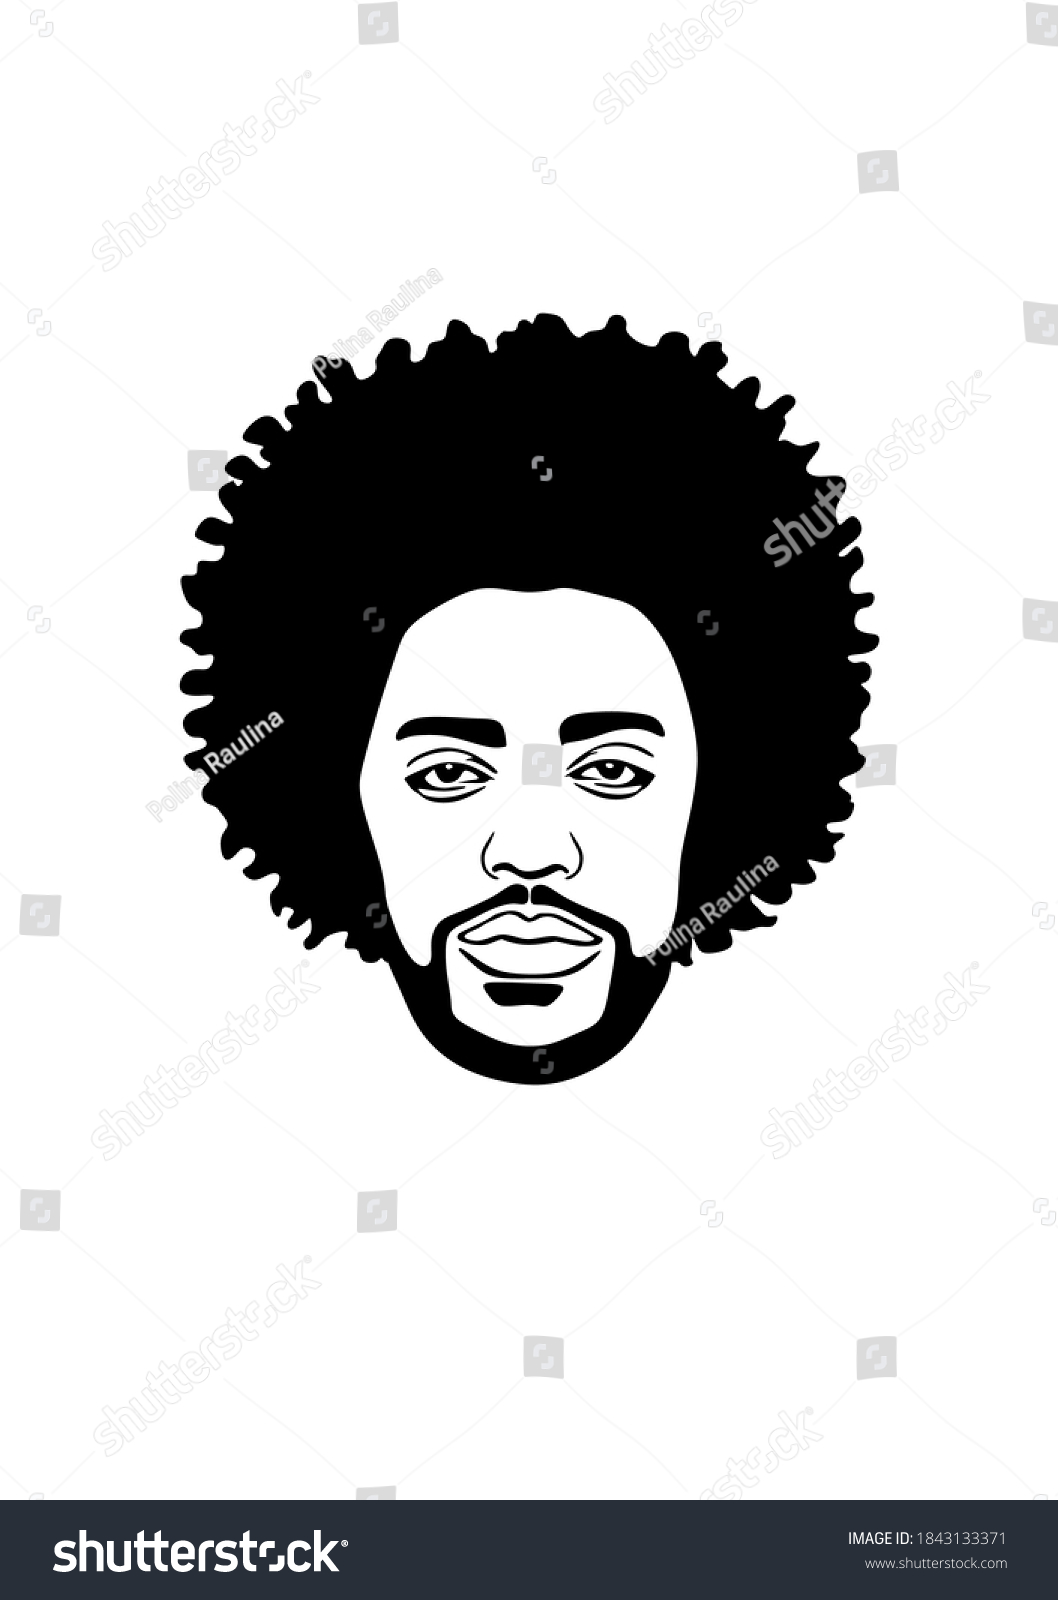 SVG of Black Afro African american male face portrait vector silhouette with curls hairstyle and beard.Man head drawing of full face isolated on white background.Wall sticker vinyl decal.Print for t shirt. svg